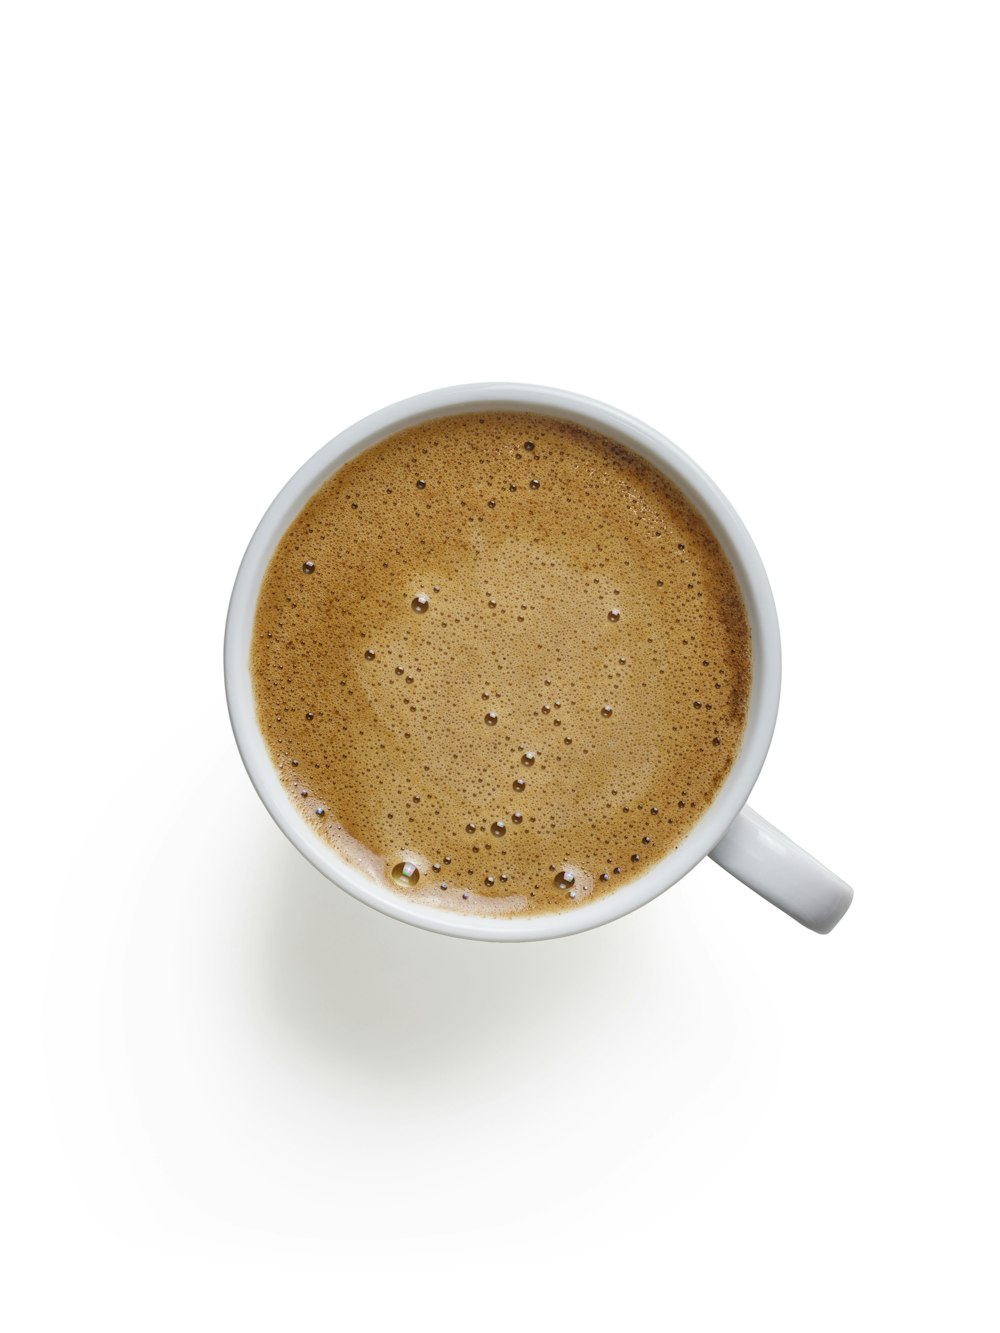 Coffee Foam Pictures  Download Free Images on Unsplash